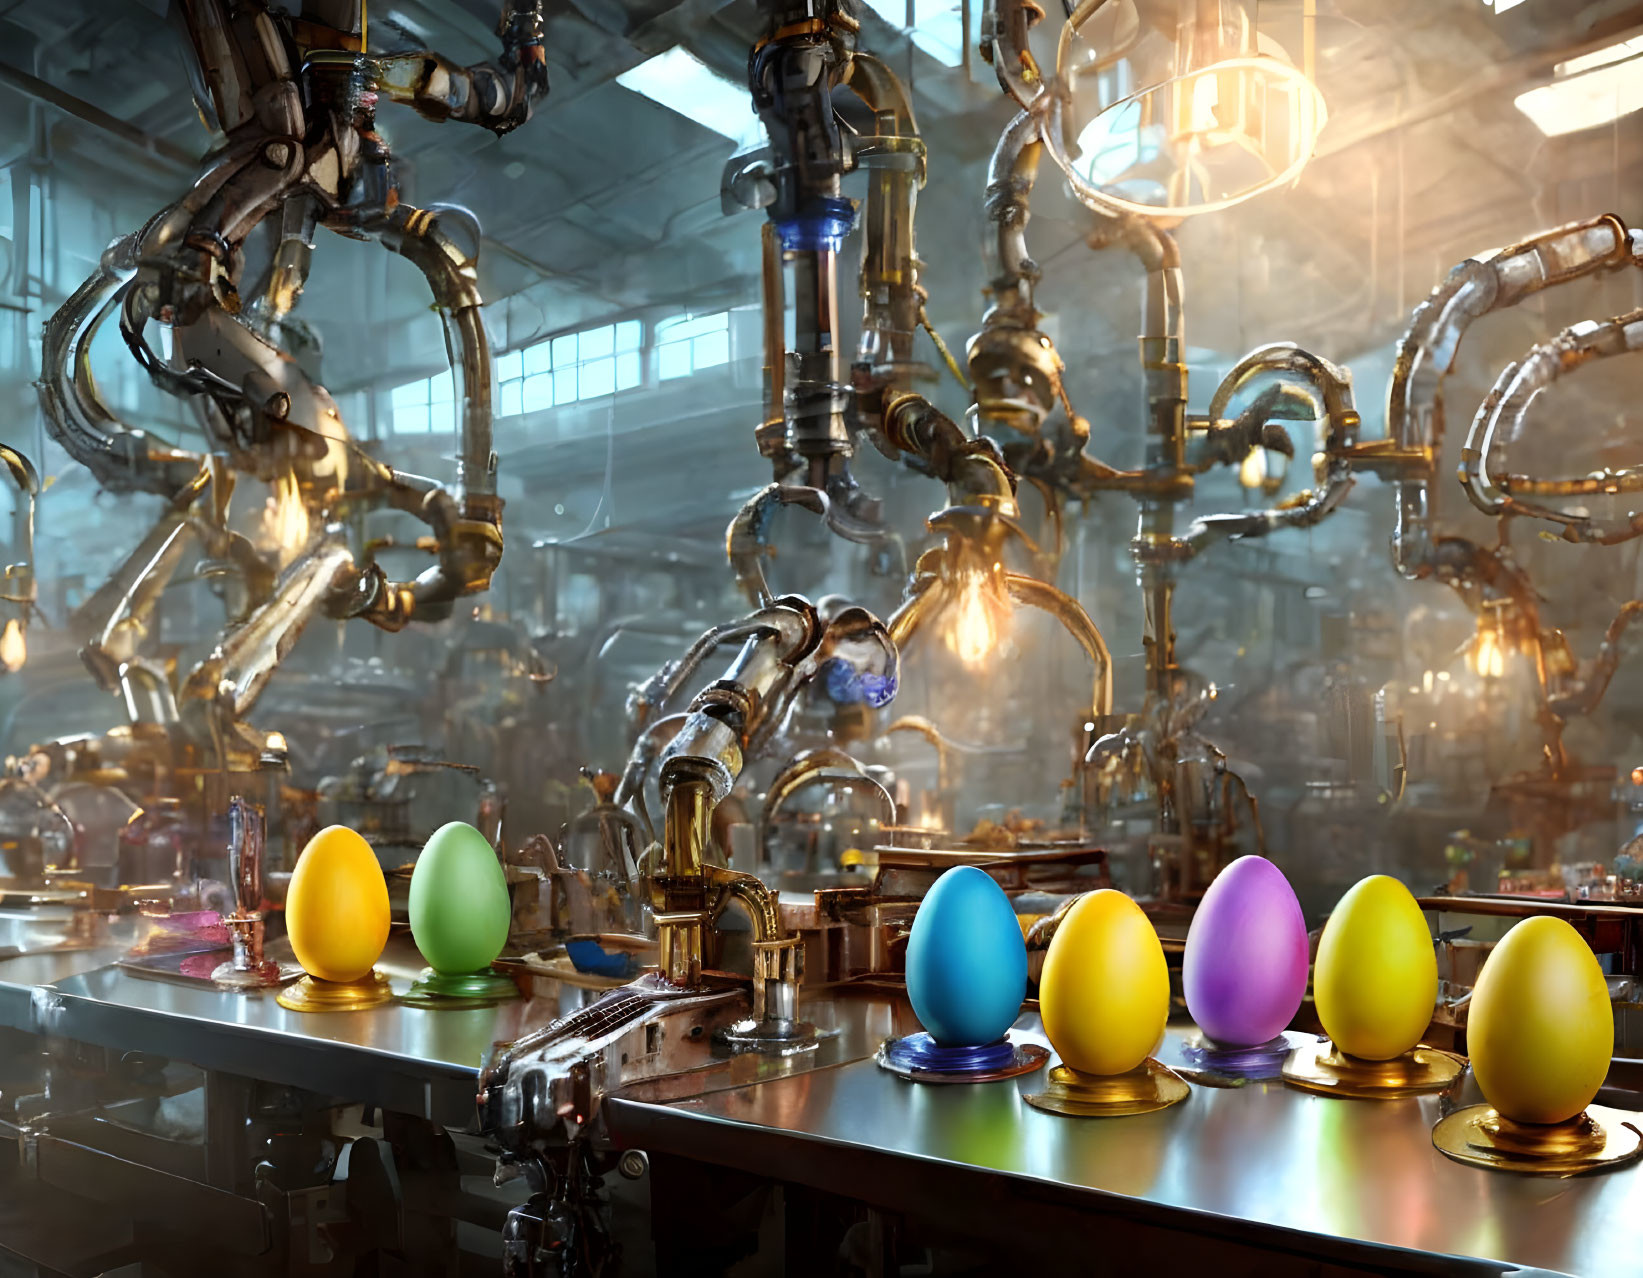 The ole Easter egg factory.